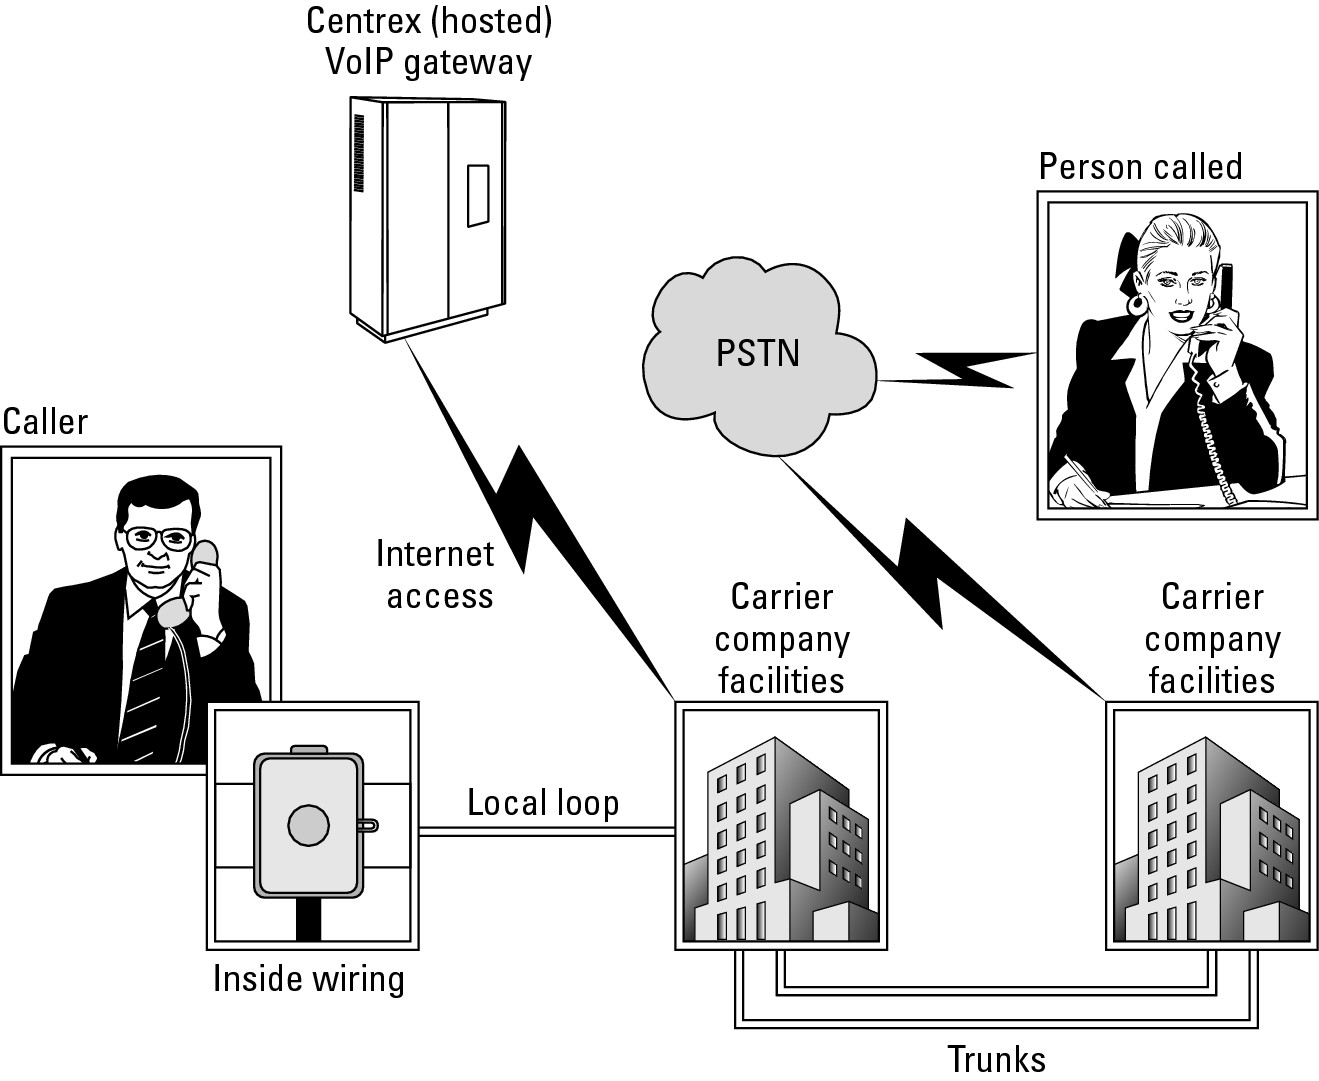 Figure 2-8: VoIP Centrex, sometimes called hosted VoIP.